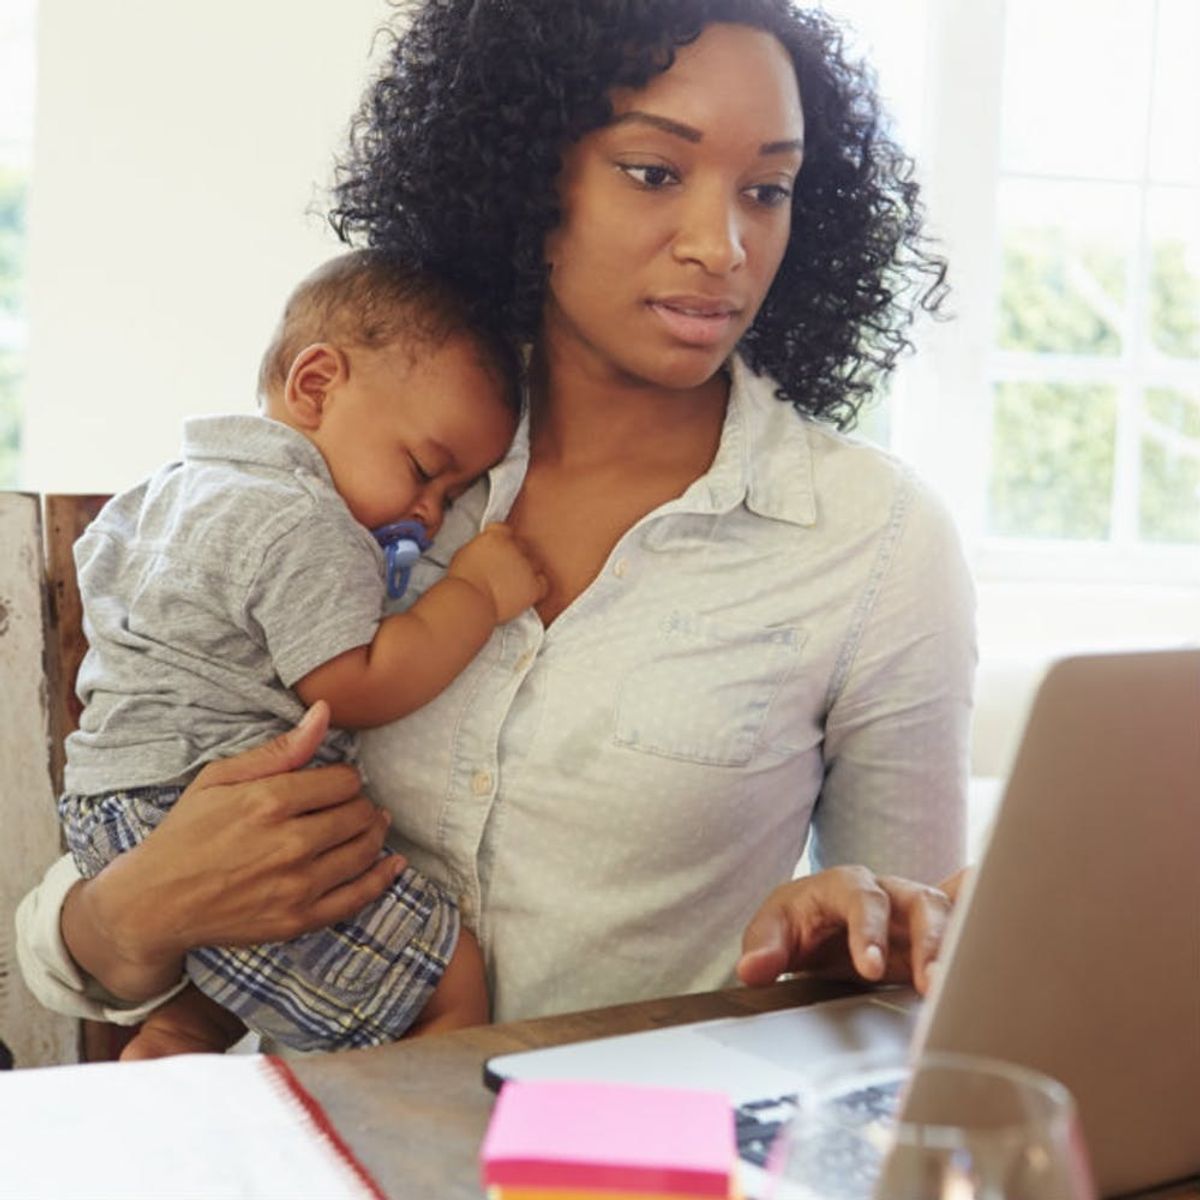 5 Reasons to Hire a Babysitter Even If You’re a Work at Home Mom